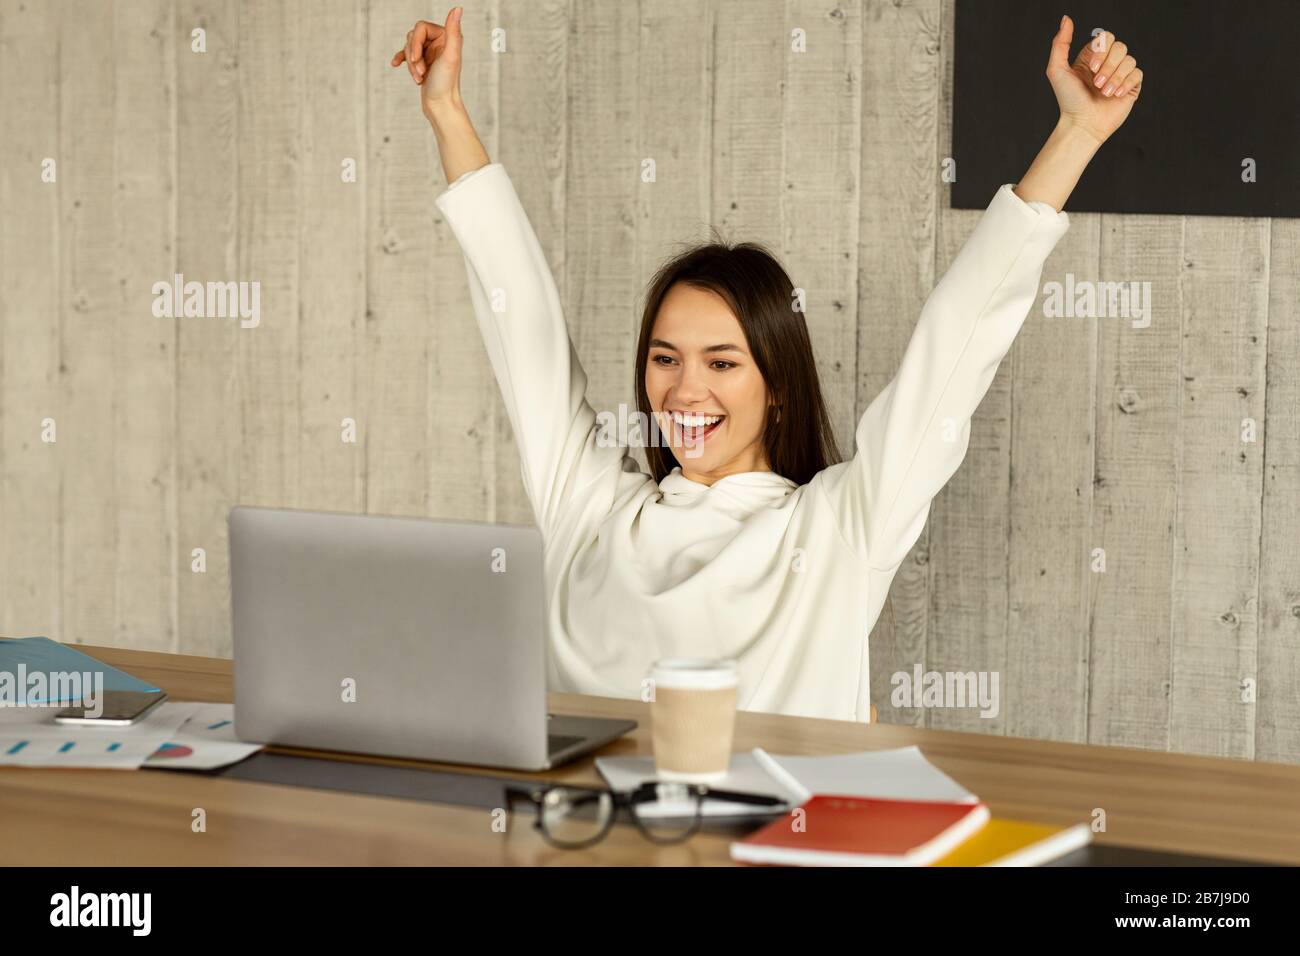 Great day at work. Woman raises hands up Stock Photo